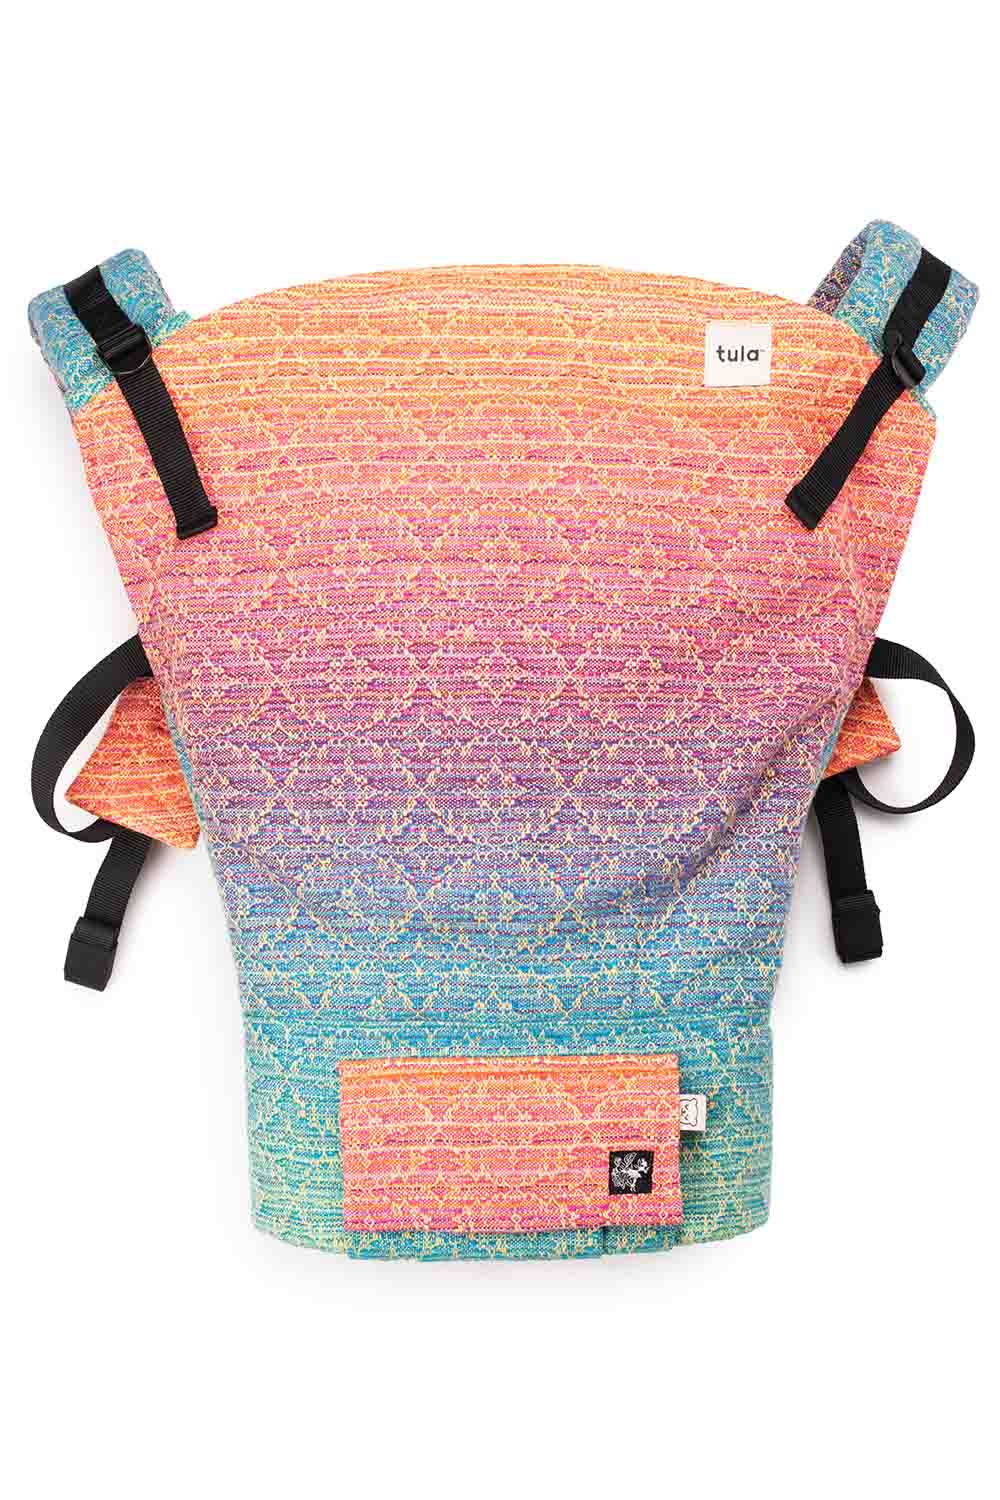 Sugar Reef - Signature Woven Toddler Carrier